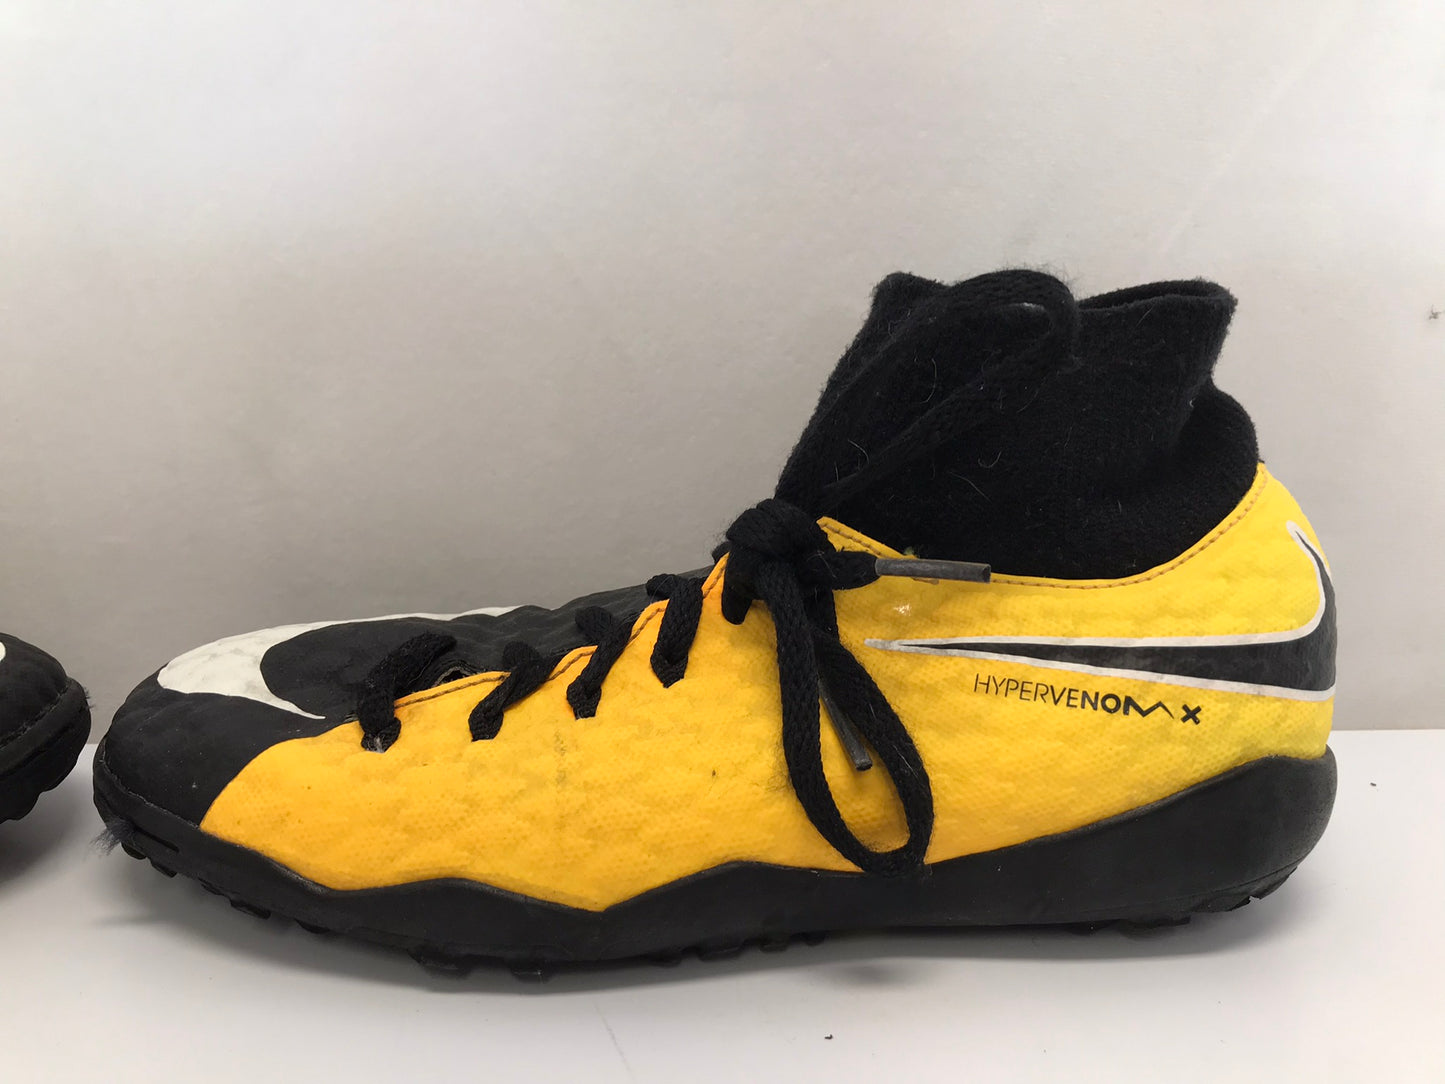 Soccer Shoes Cleats Indoor Child Size 4 Nike Hypervenom With Slipper Foot Tangerine Black